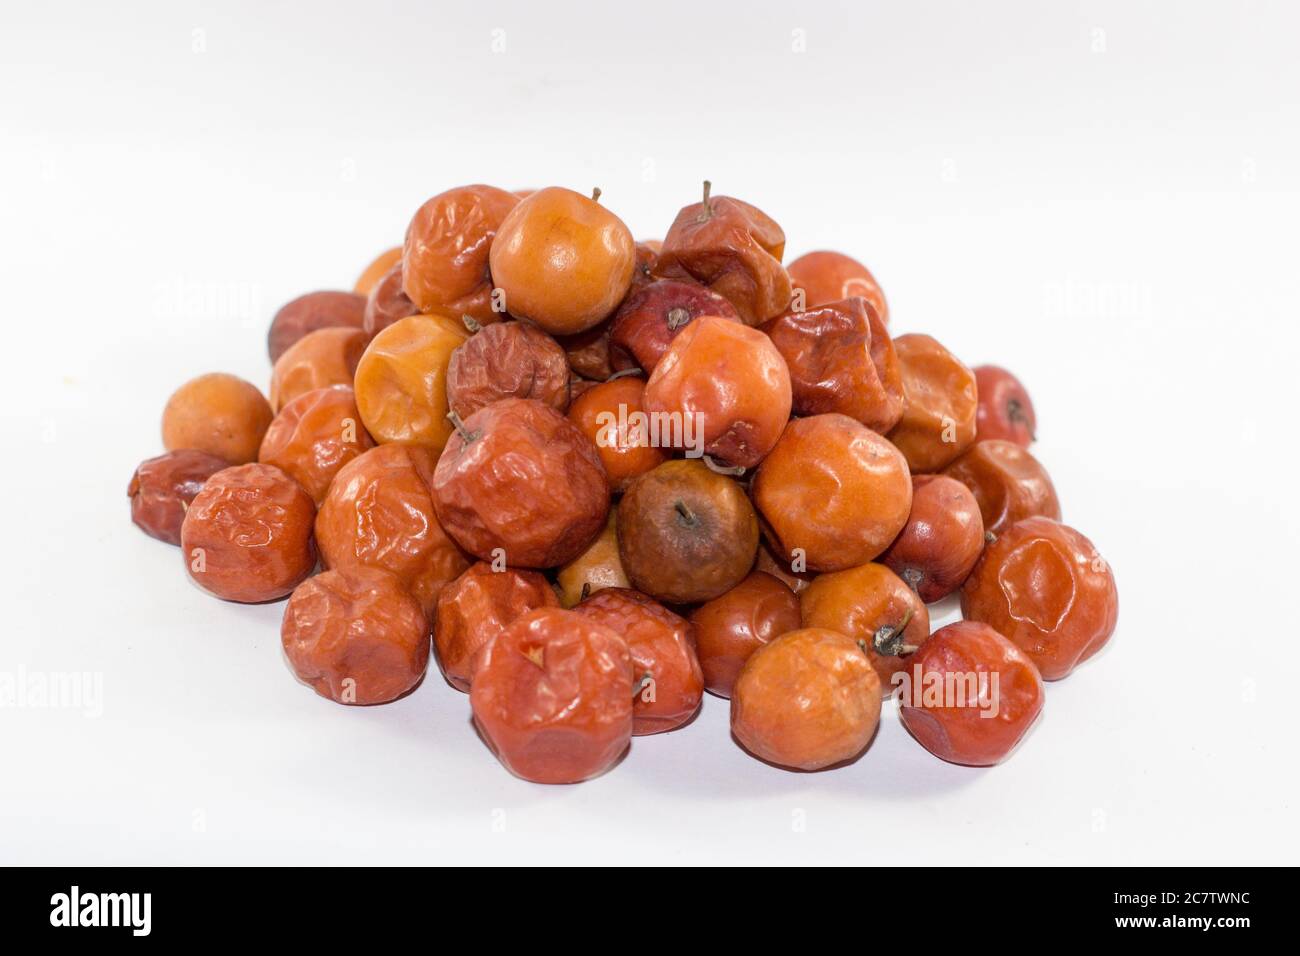 Ziziphus mauritiana sweet fruits, also known as Chinese date, Chinese apple, Indian jujube or plum, Musawu or Maçanica.  It is quite rich in Vitamin C Stock Photo